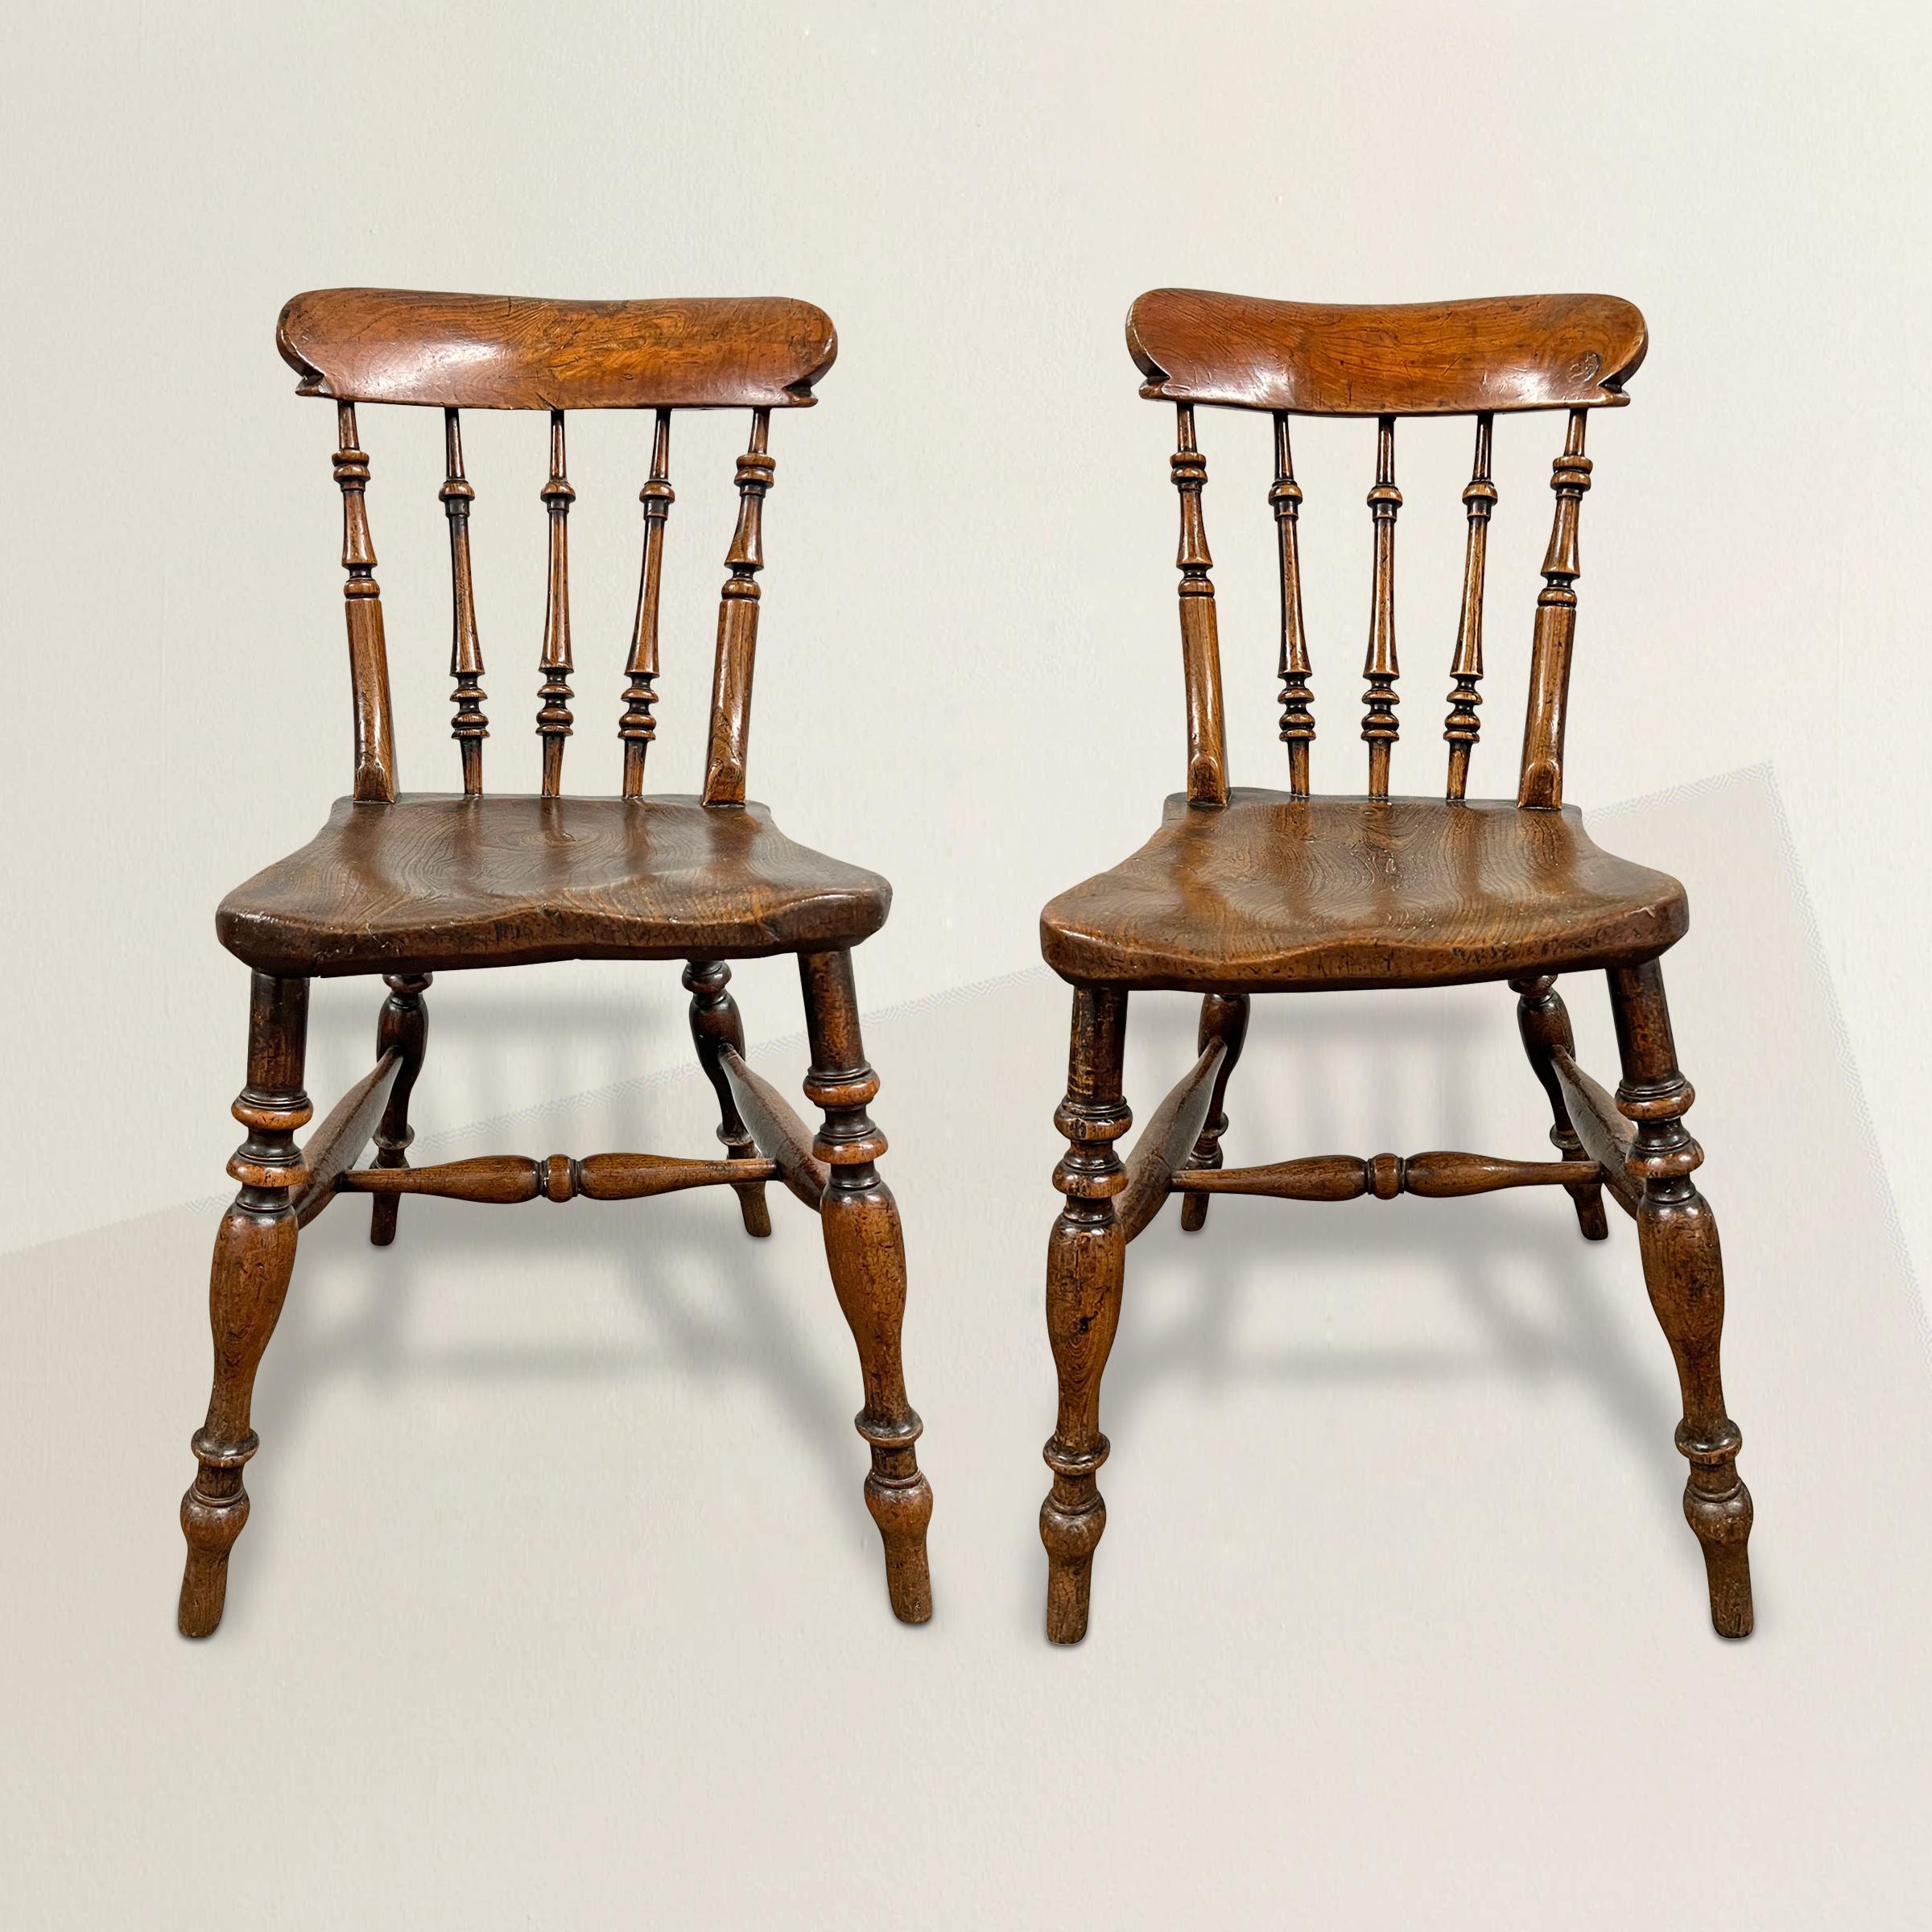 A stunning pair of early 19th century English elmwood side chairs, each with solid elm seats supported by turned legs and stretchers, and backs with turned splats supporting chunky crest rails, and one of the best patinas we've seen in a long time. 